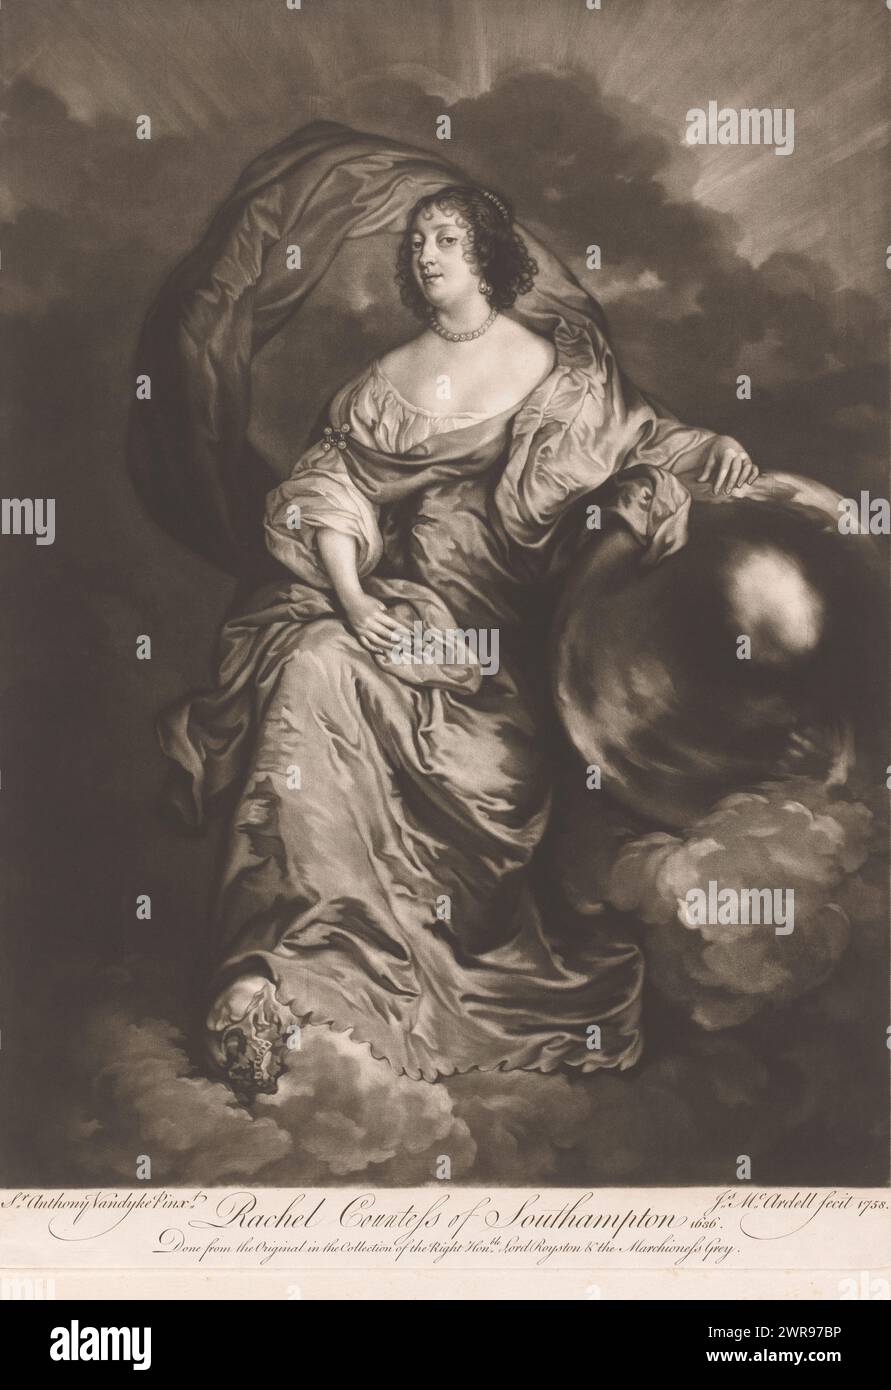 Portrait of Rachel Wriothesley, Rachel Countess of Southampton (title on object), print maker: James McArdell, after painting by: Anthony van Dyck, London, 1758, paper, height 497 mm × width 350 mm, print Stock Photo